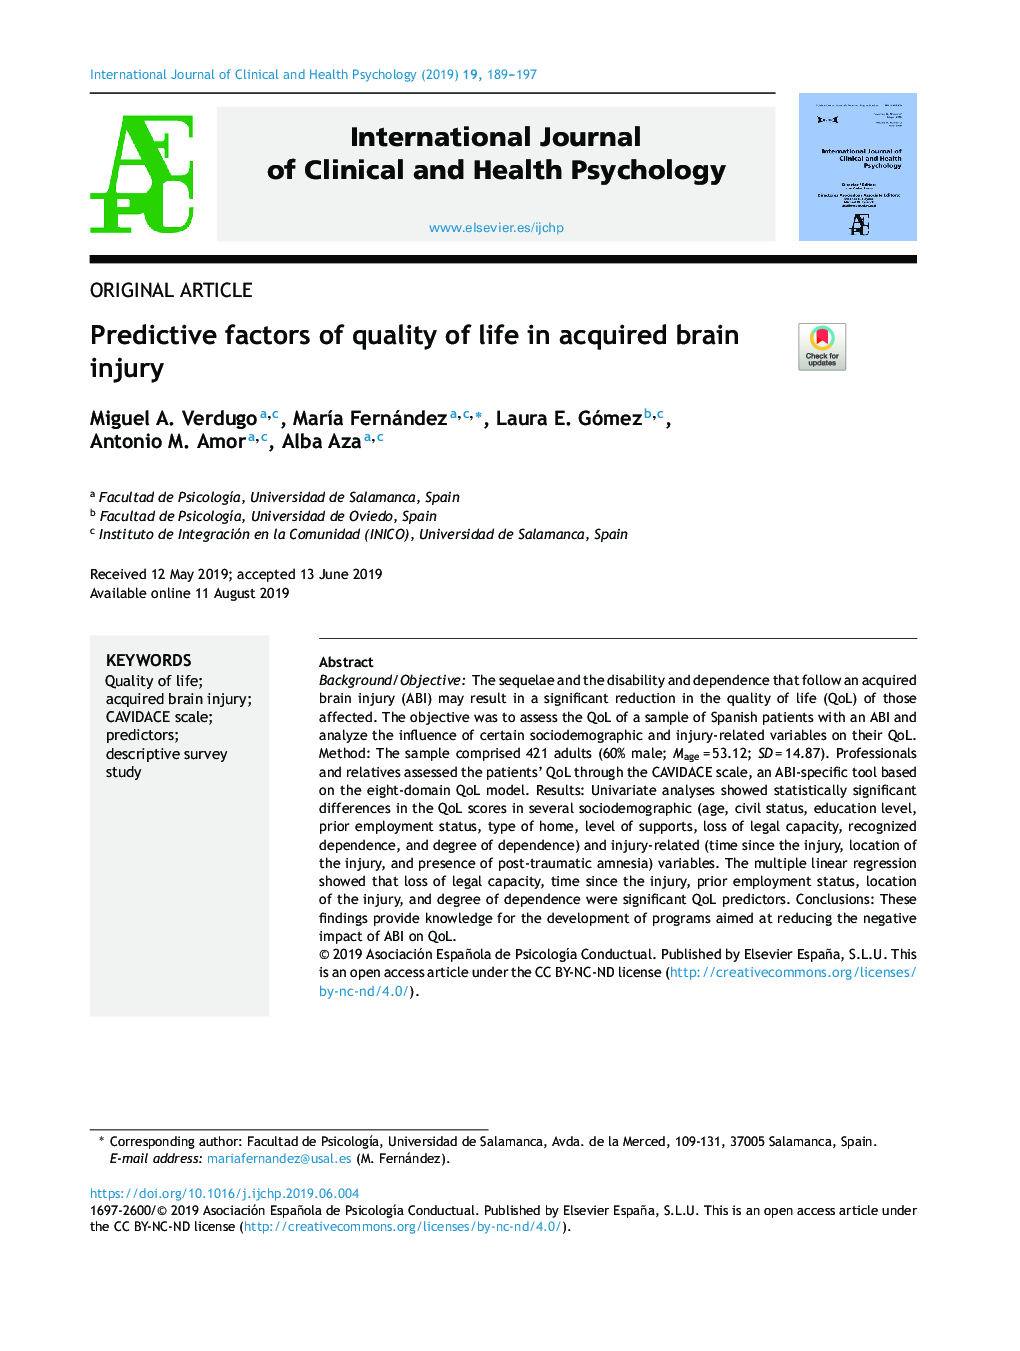 Predictive factors of quality of life in acquired brain injury